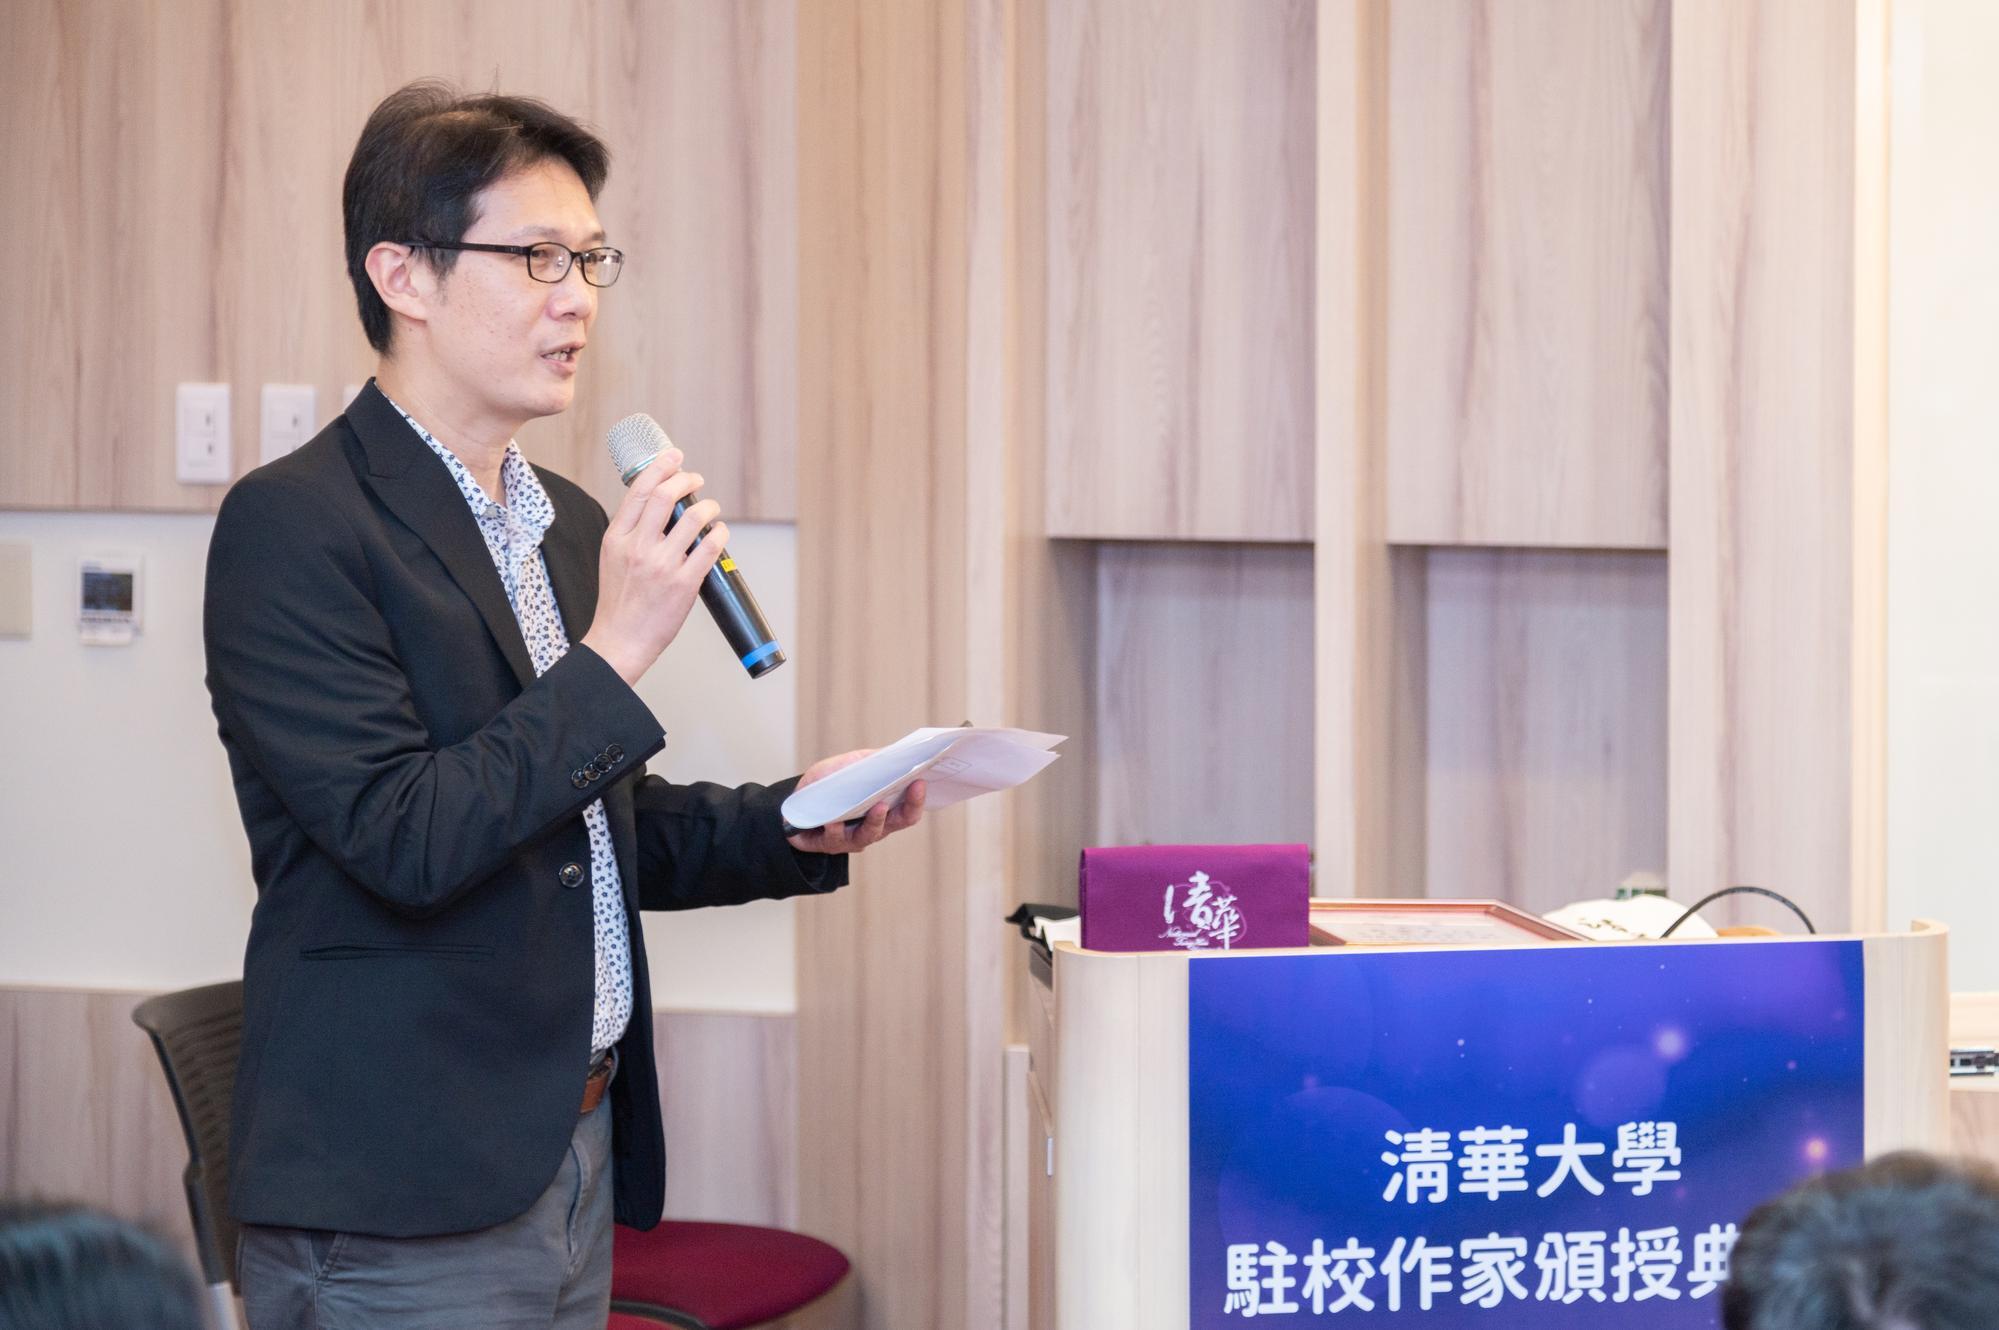 Shih-lung Lo (羅仕龍), associate professor in the Department of Chinese Literature, expresses hope that students will develop the ability to tell stories that captivate readers and connect with them at a deep level, which is the kind of soft power crucial to tackling future challenges.